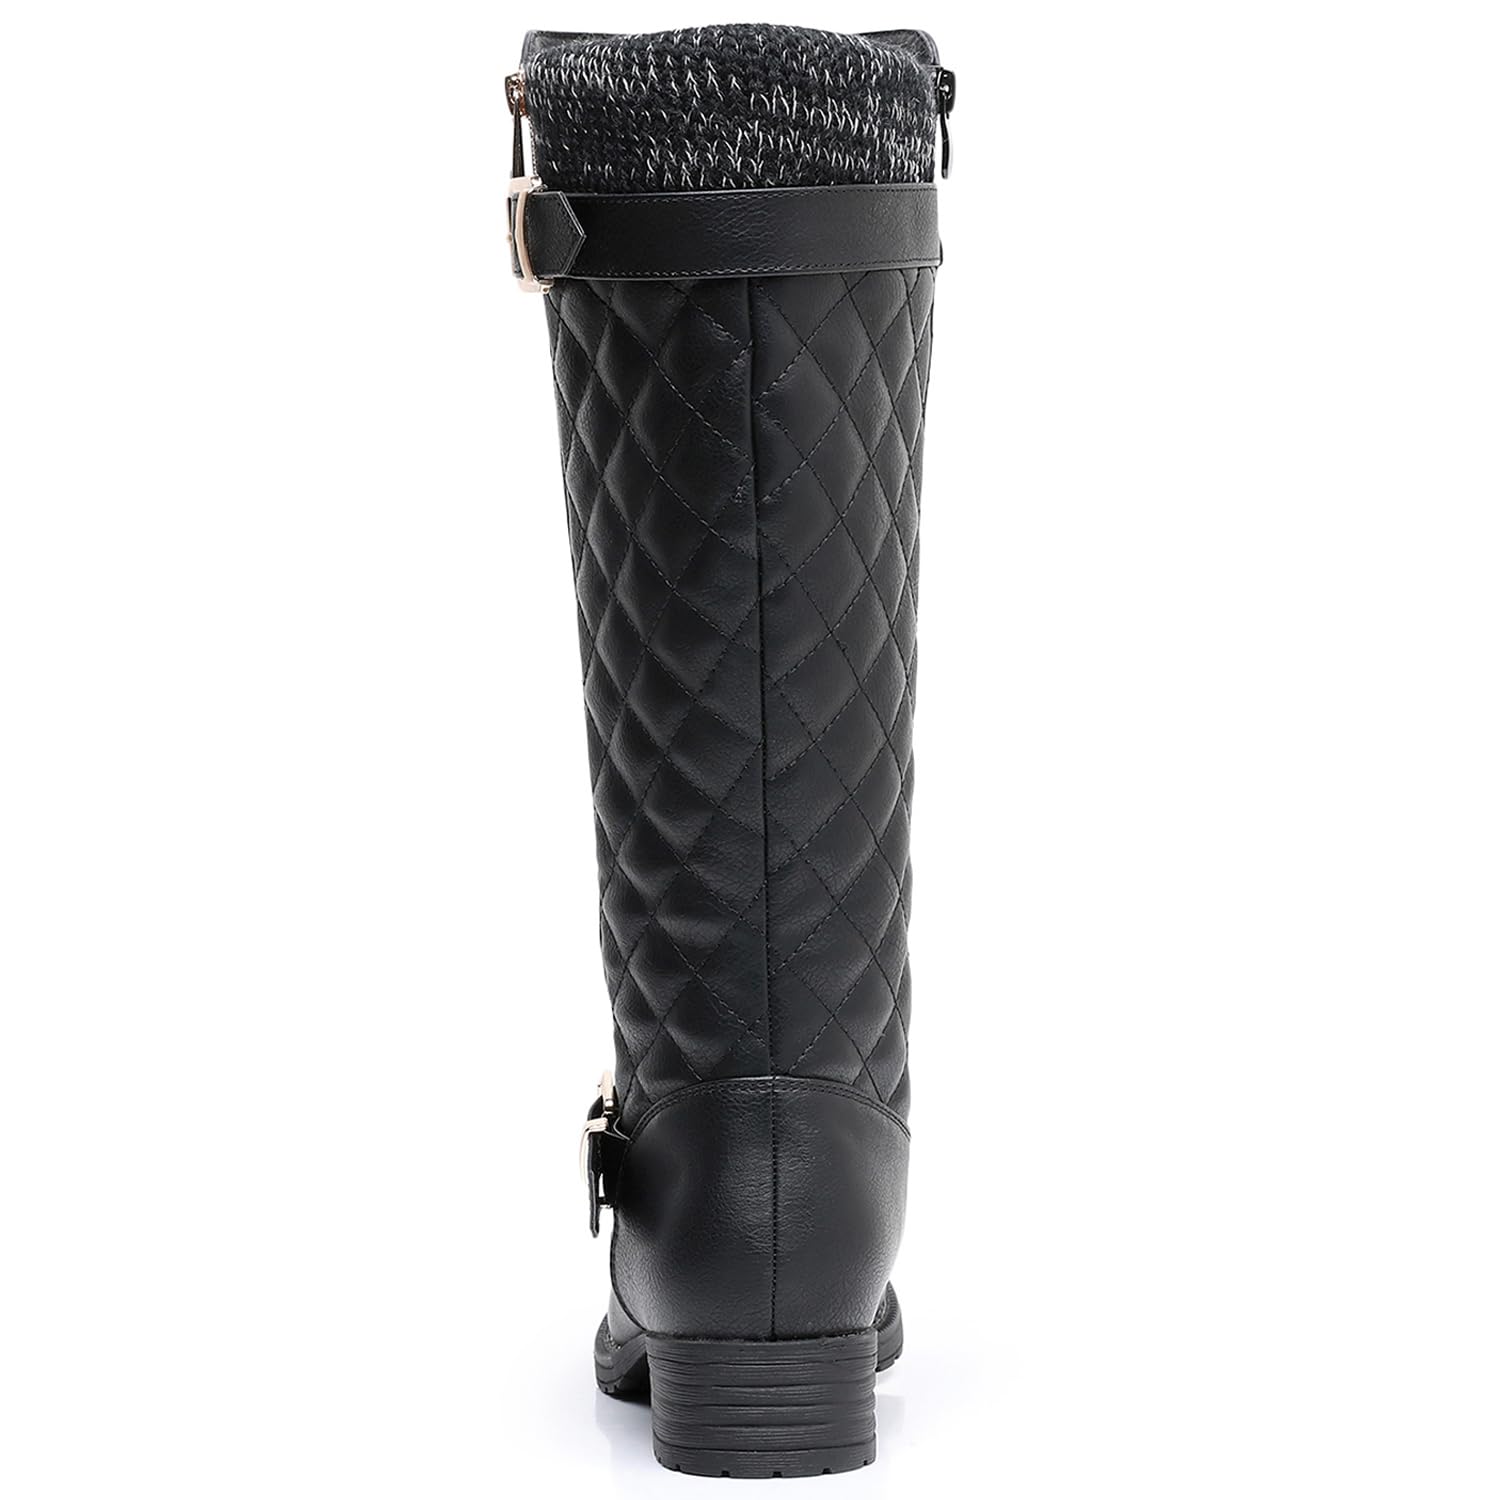 GLOBALWIN Women's Quilted Knee-High Fashion Boots